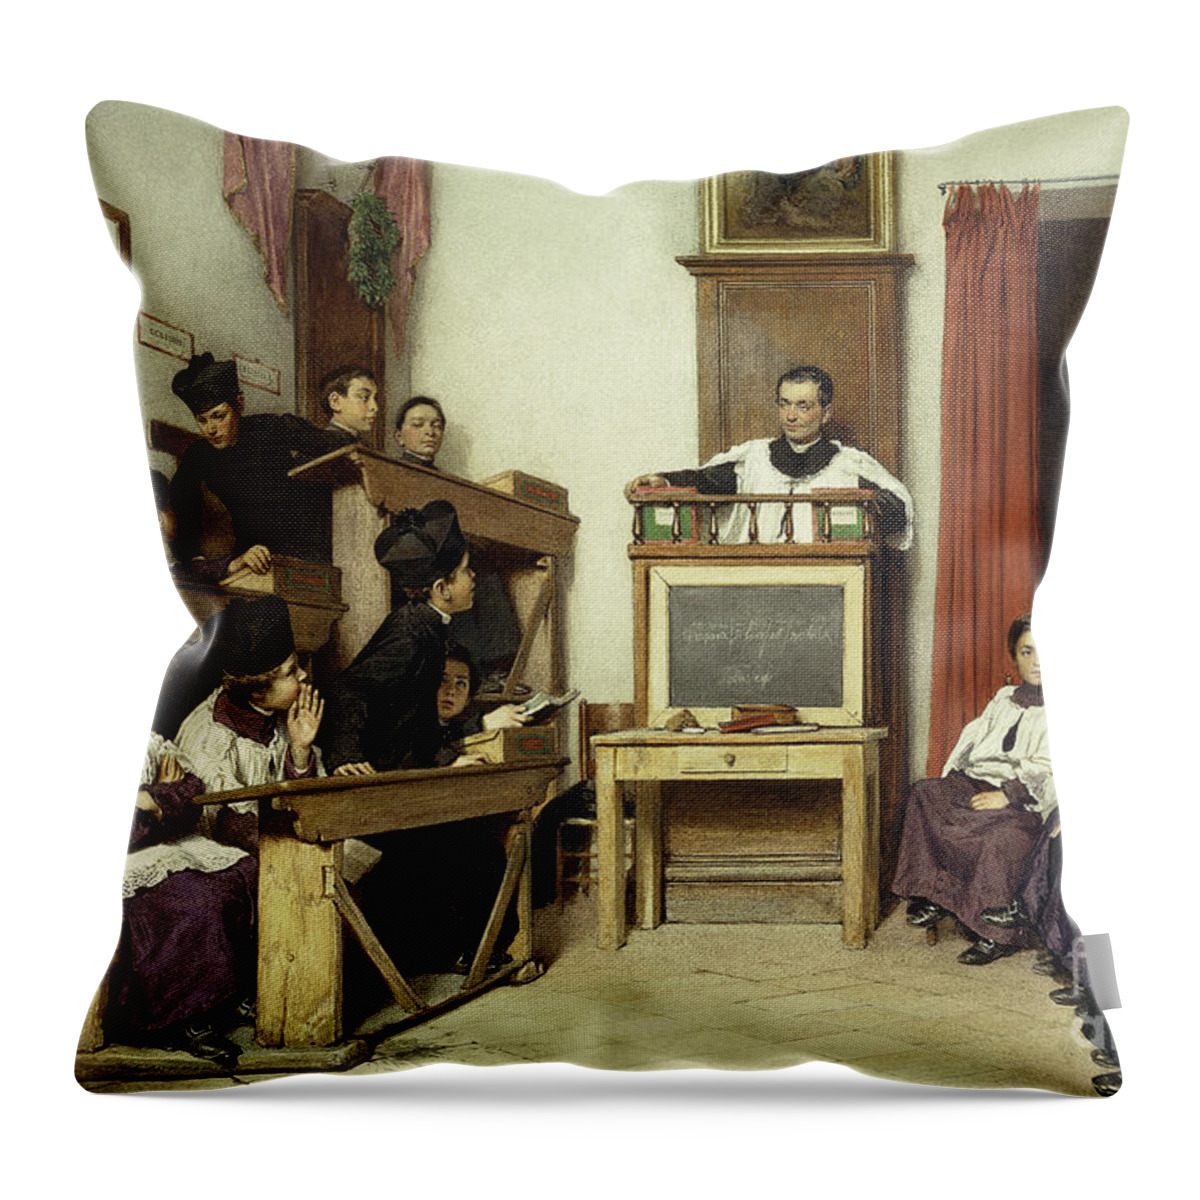 Latin Throw Pillow featuring the painting The Latin Class by Ludwig Passini